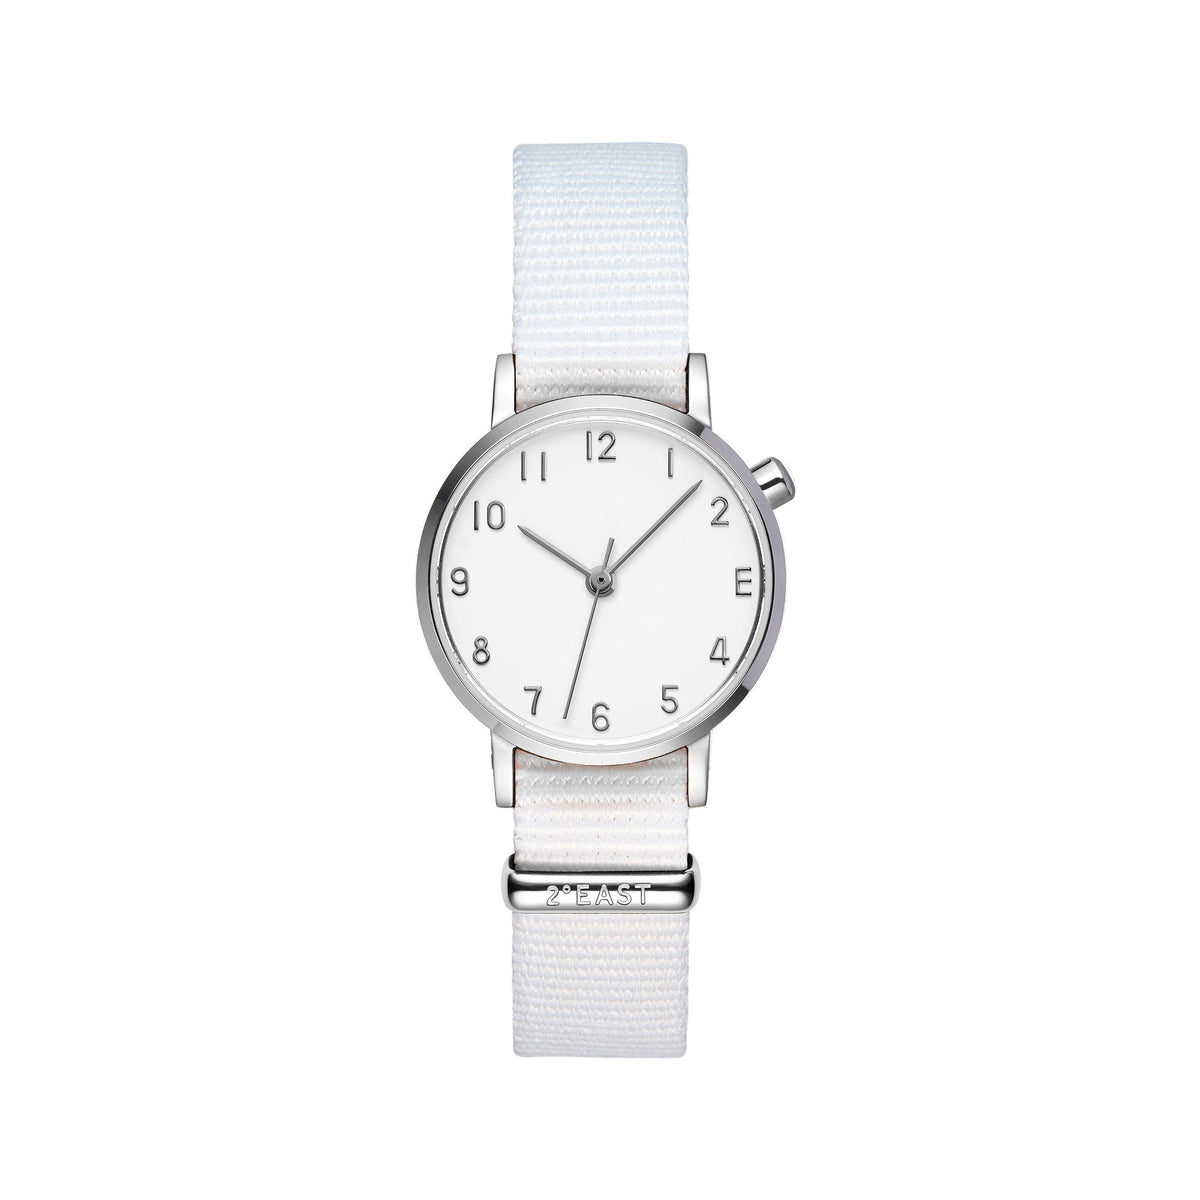 The White and Silver Watch - Ivory (Kids)